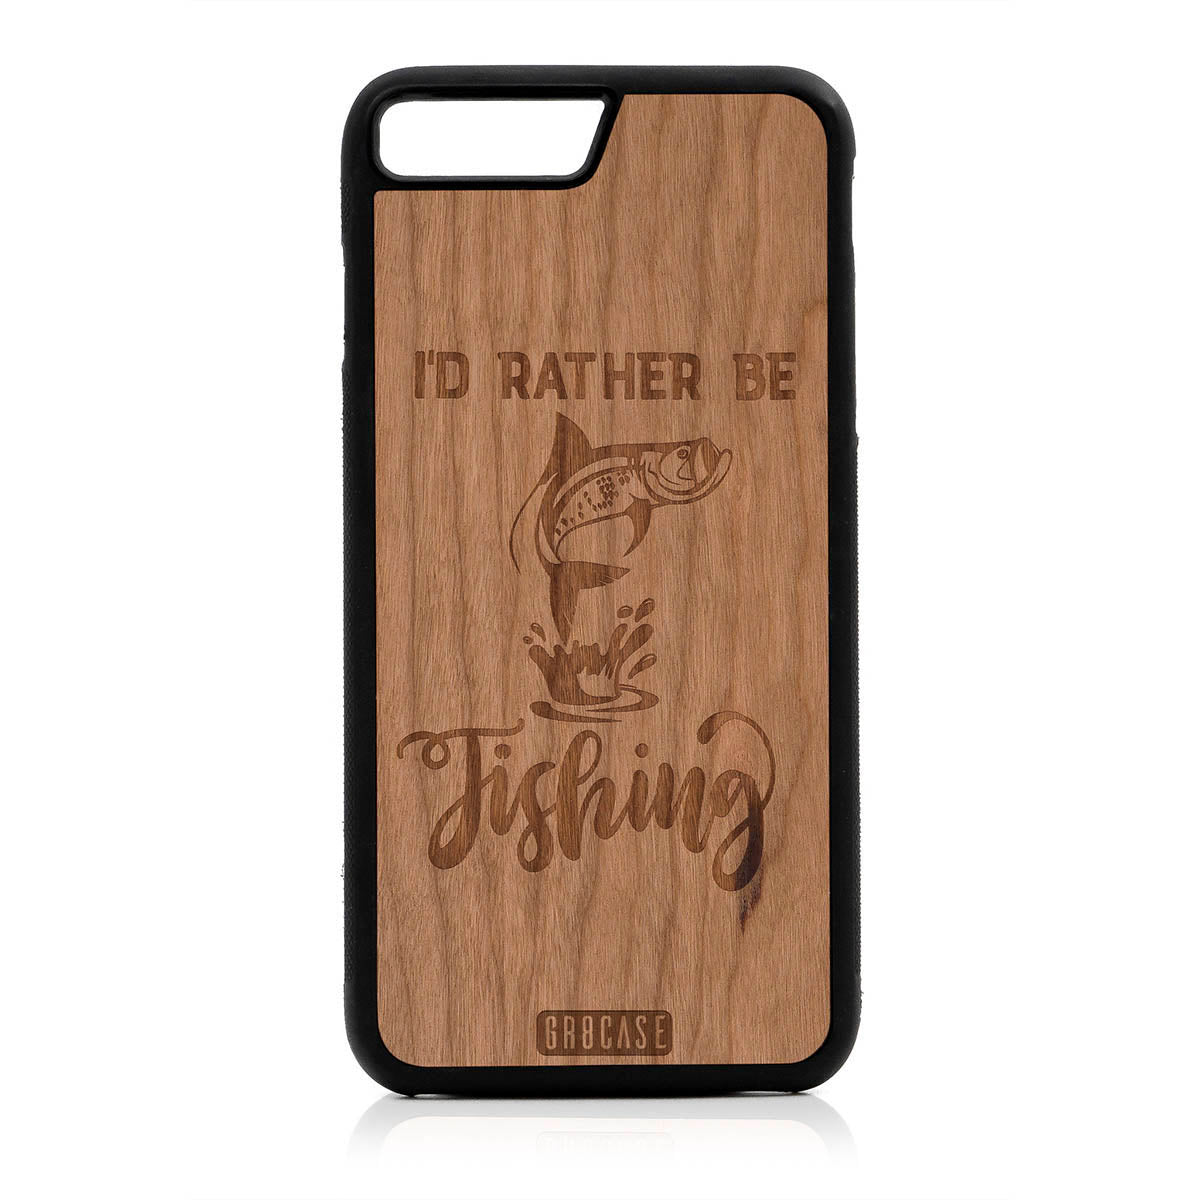 I'D Rather Be Fishing Design Wood Case For iPhone 7 Plus / 8 Plus